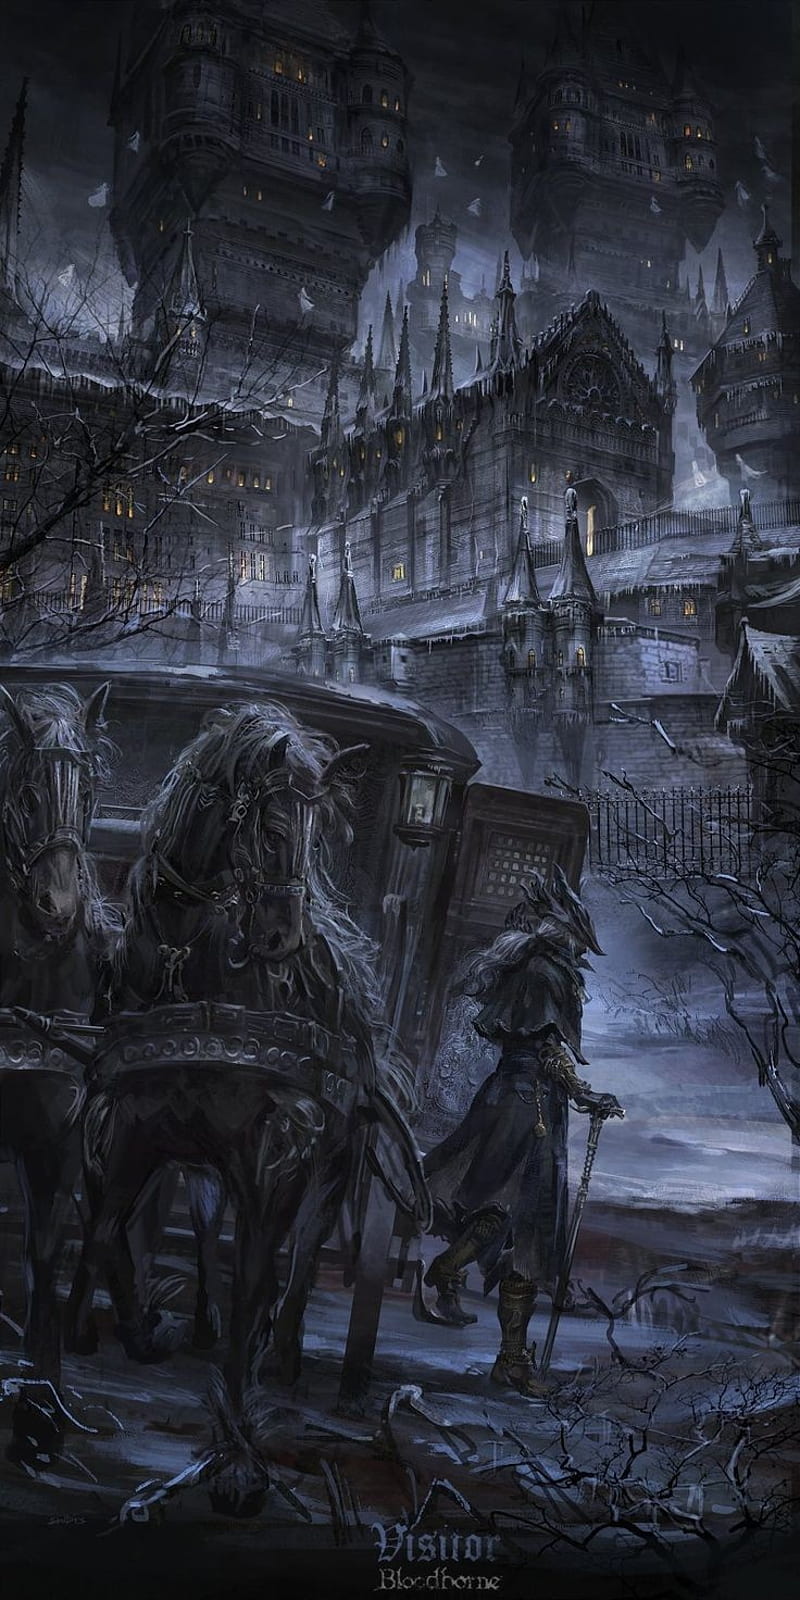 Bloodborne phone wallpaper 1080P 2k 4k Full HD Wallpapers Backgrounds  Free Download  Wallpaper Crafter